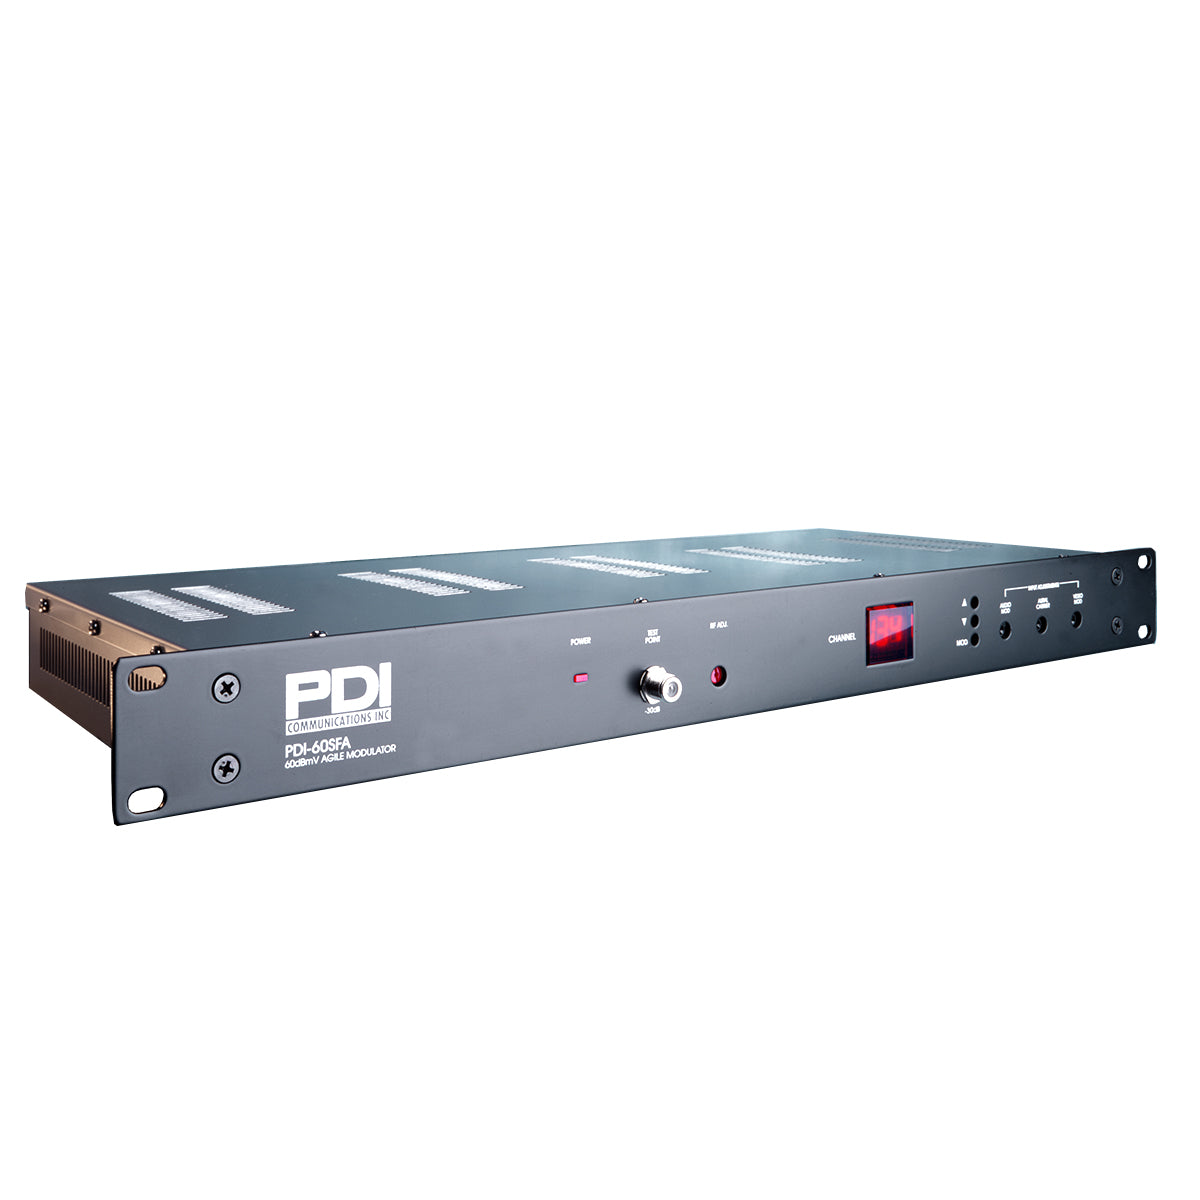 PDI-60SFA 860MHz 60dBmV Low Cost High Performance SAW Filtered Frequency Agile Modulator